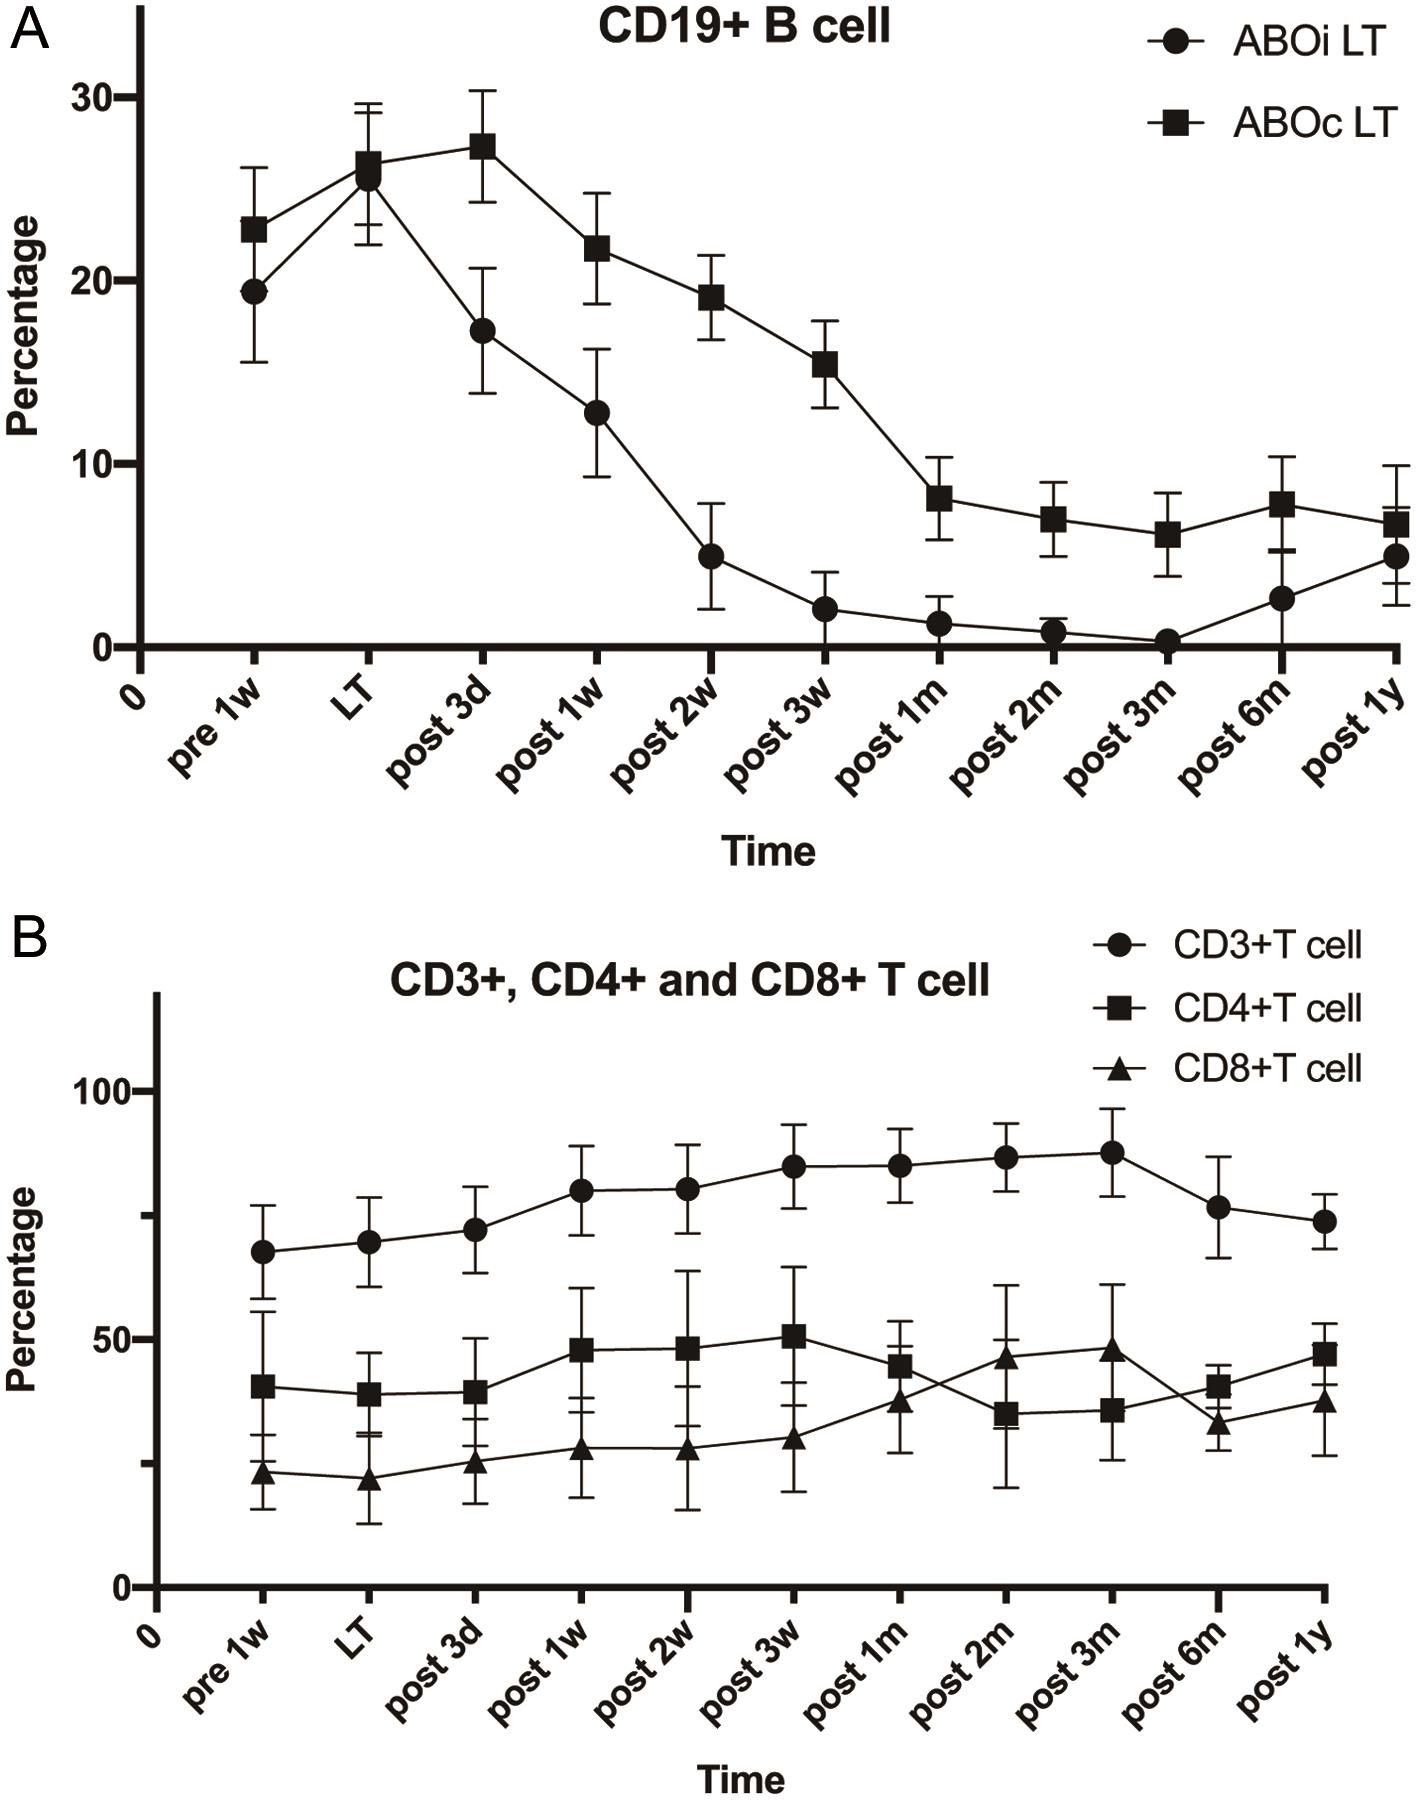 Changes of CD19<sup>+</sup> B-cell kinetics.